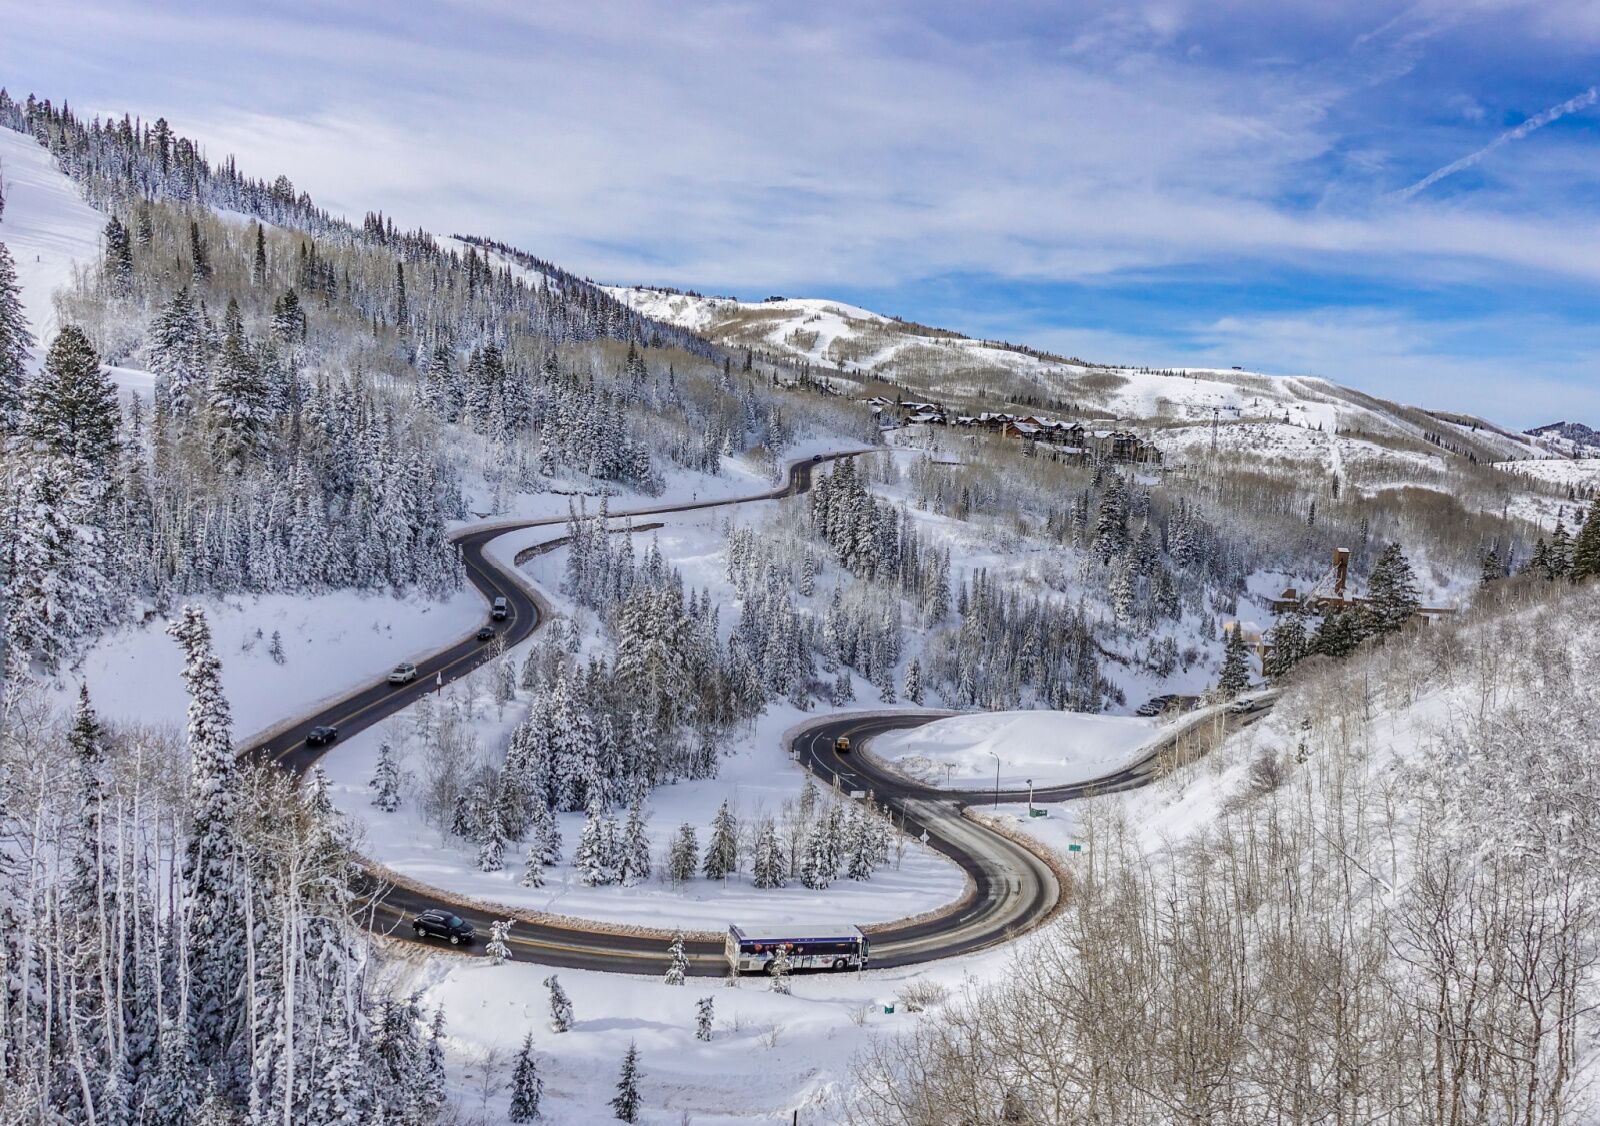 The winding road to deer valley, which you'll have to drive if you want to go there for Salt Lake City skiing